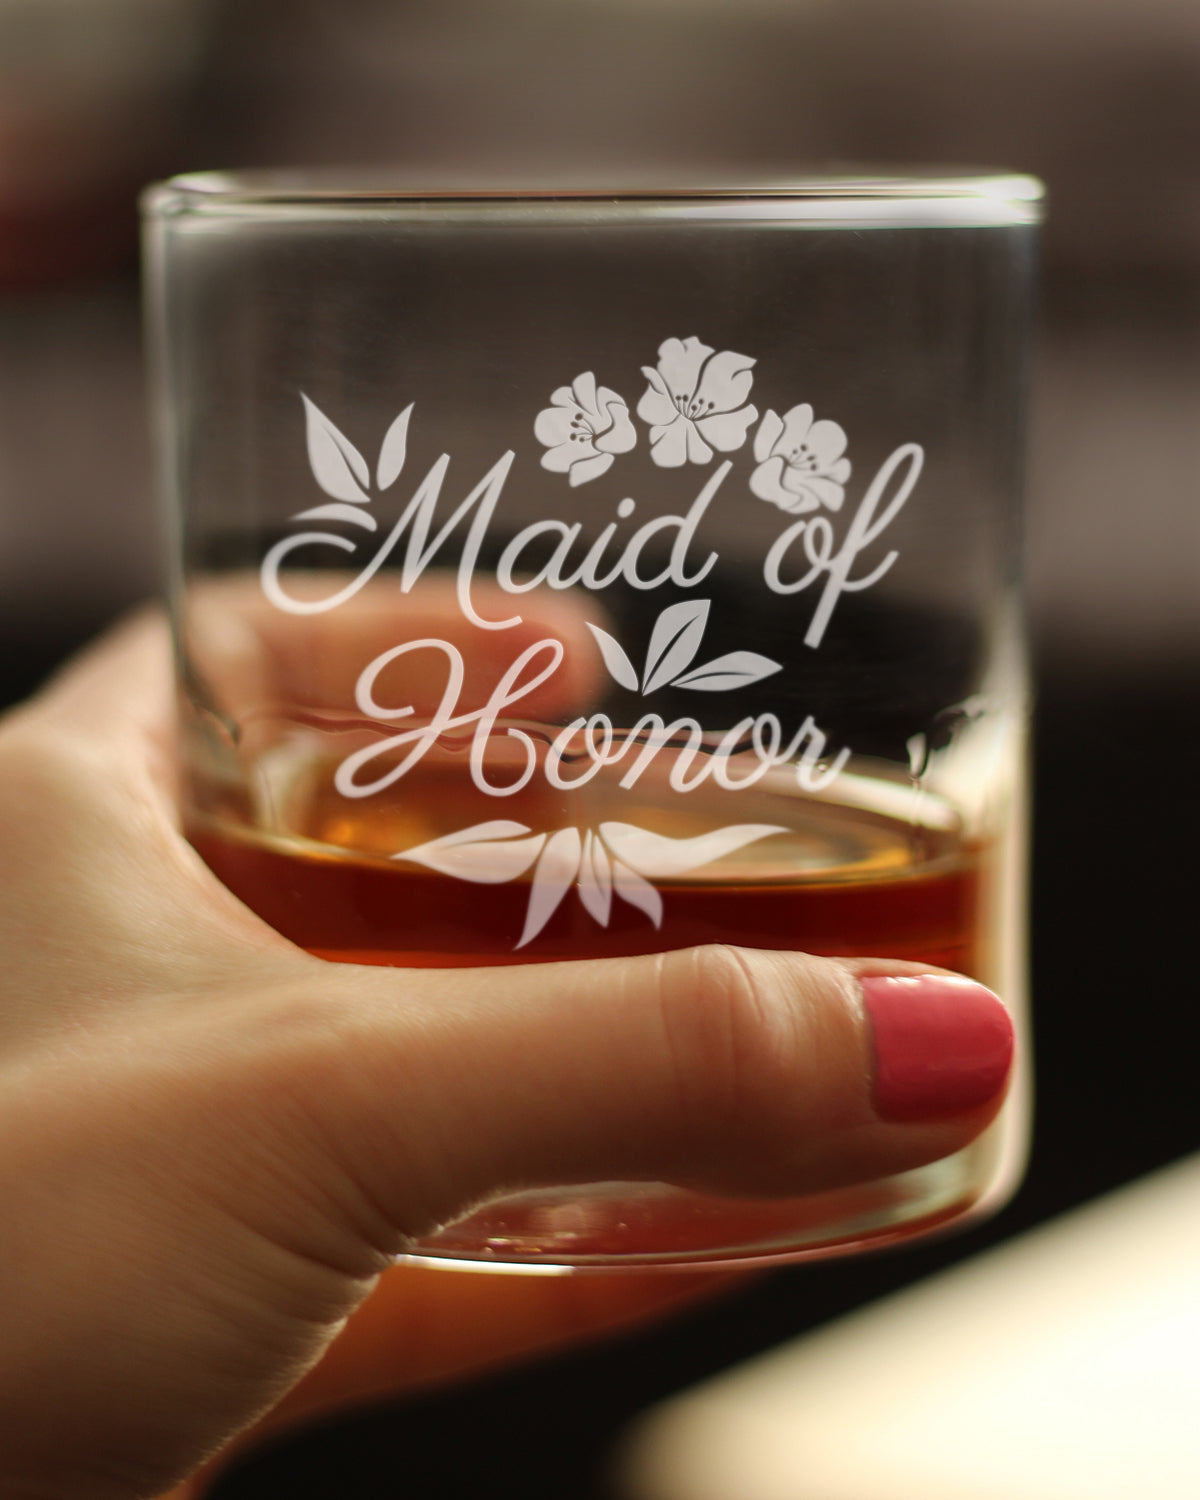 Maid of Honor Old Fashioned Rocks Glass - Maid of Honor Proposal Gifts - Unique Engraved Wedding Cup Gift